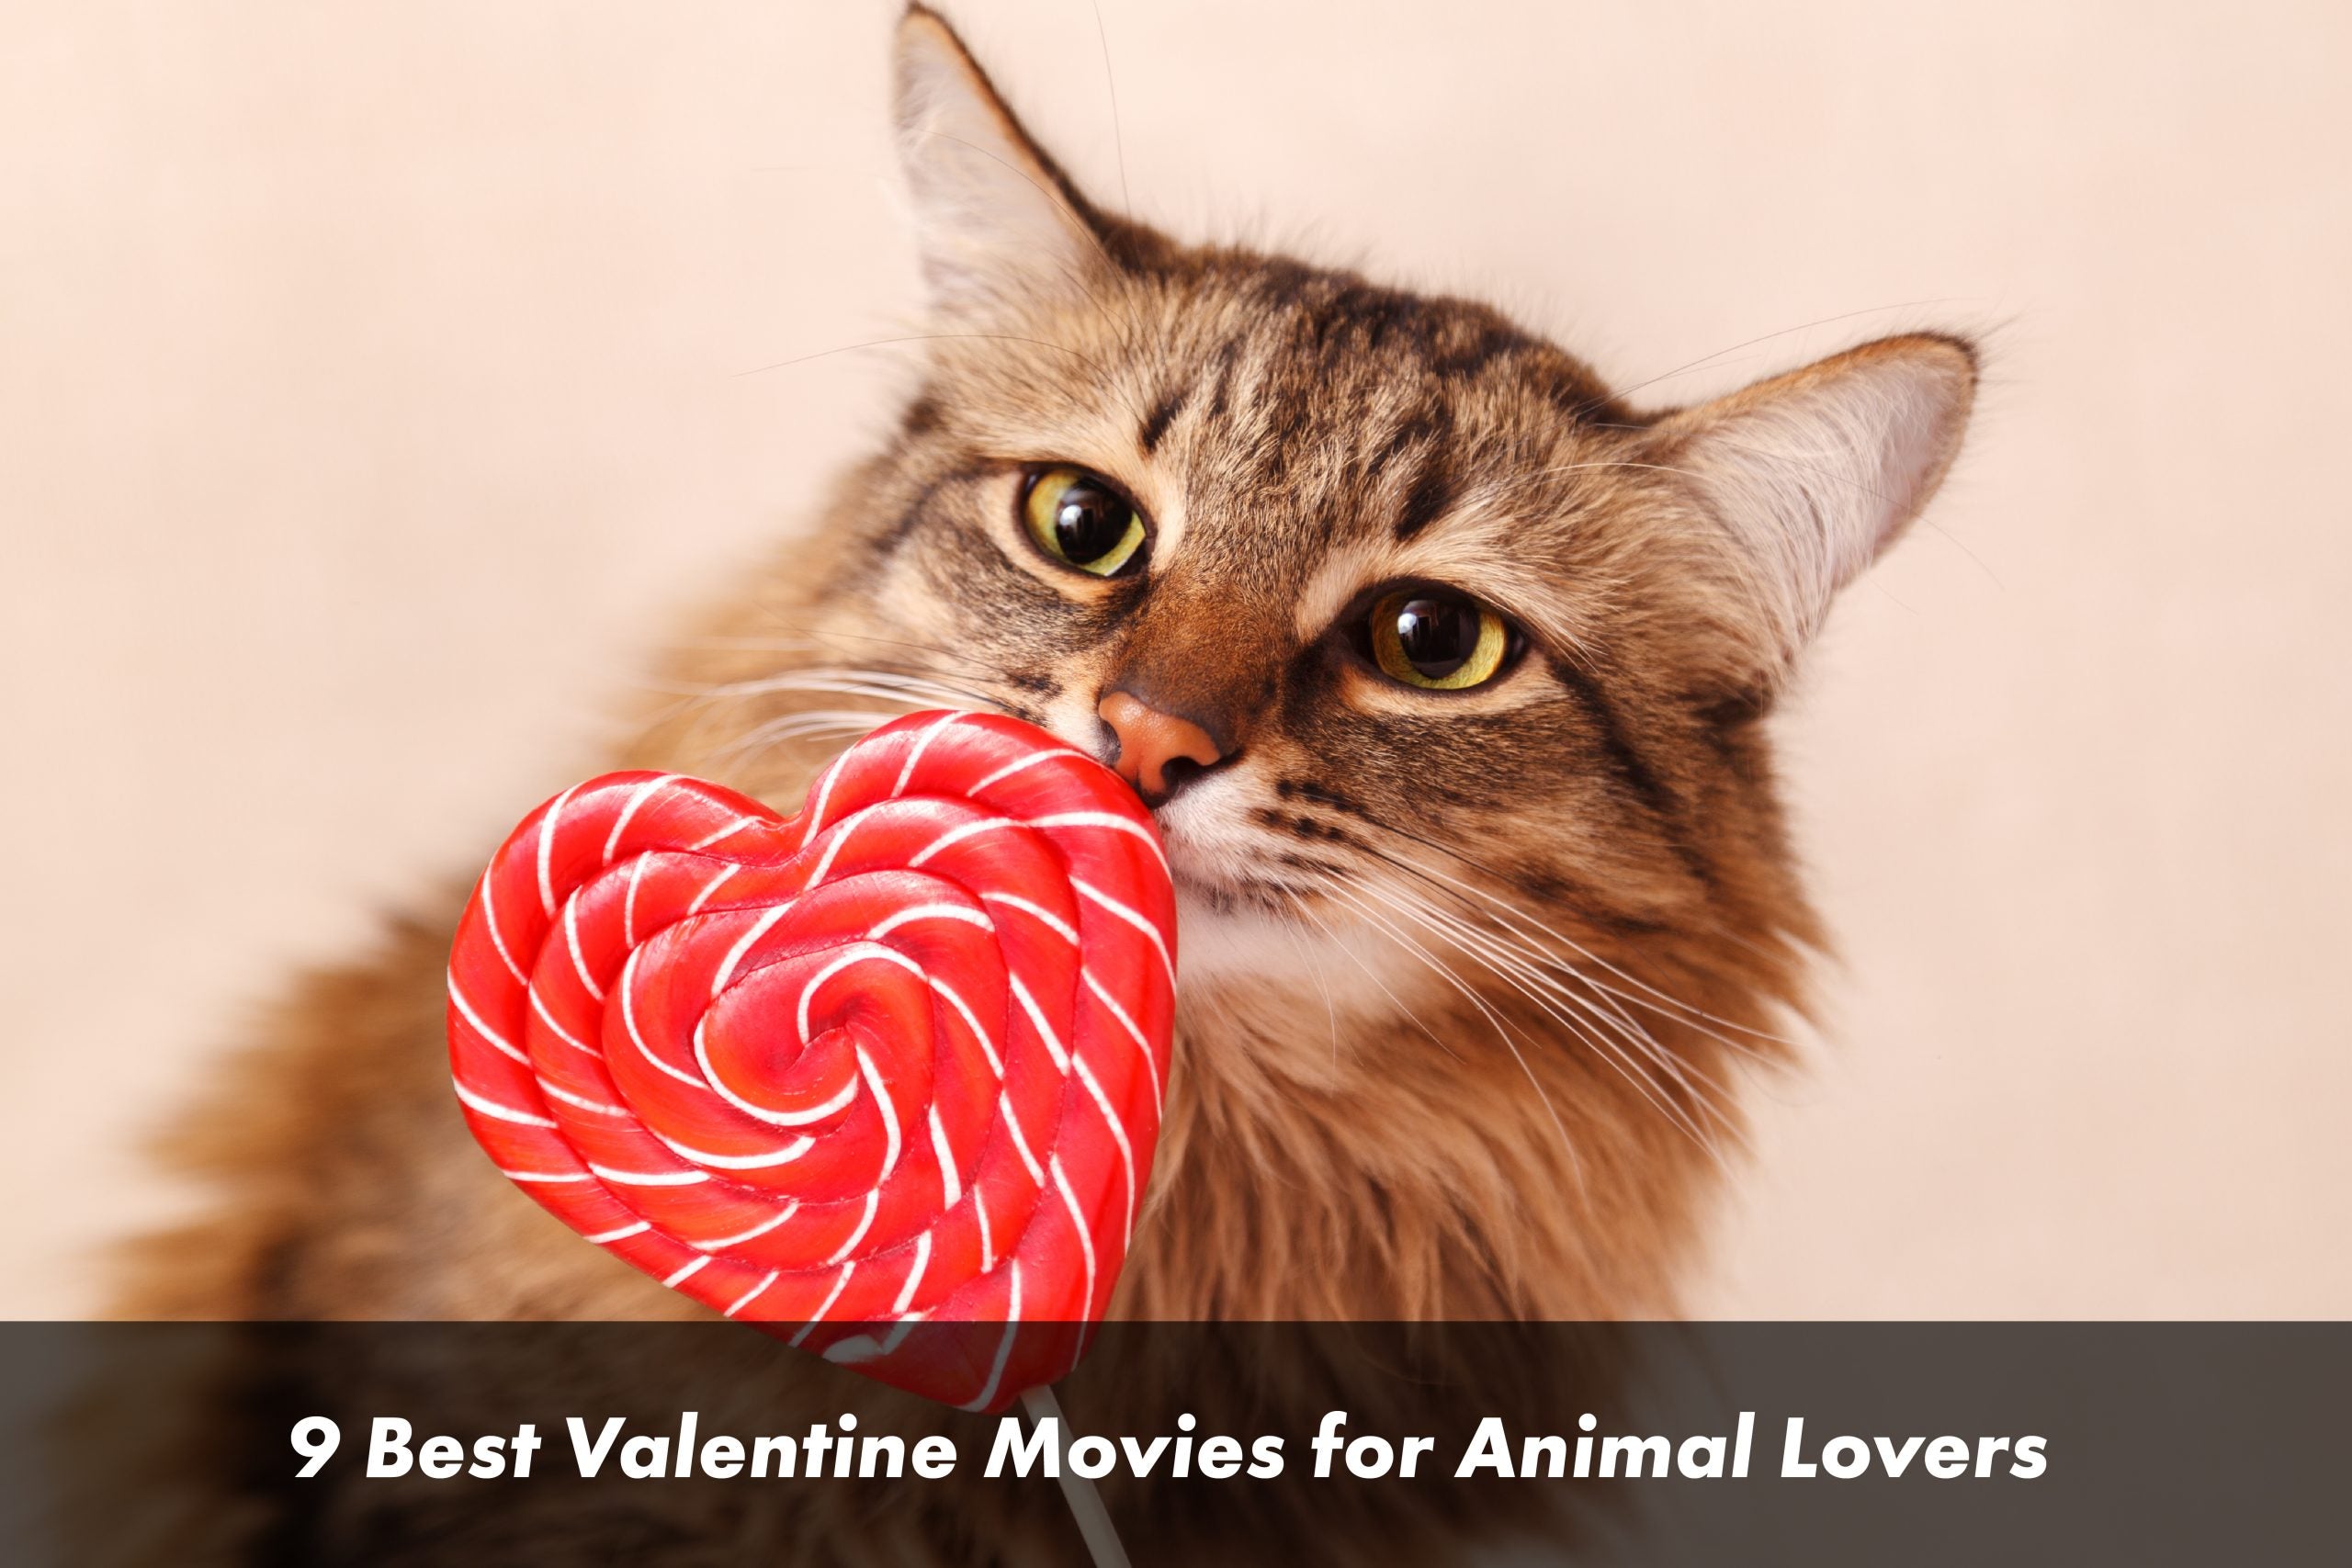 9 Best Valentine Movies for Animal Lovers